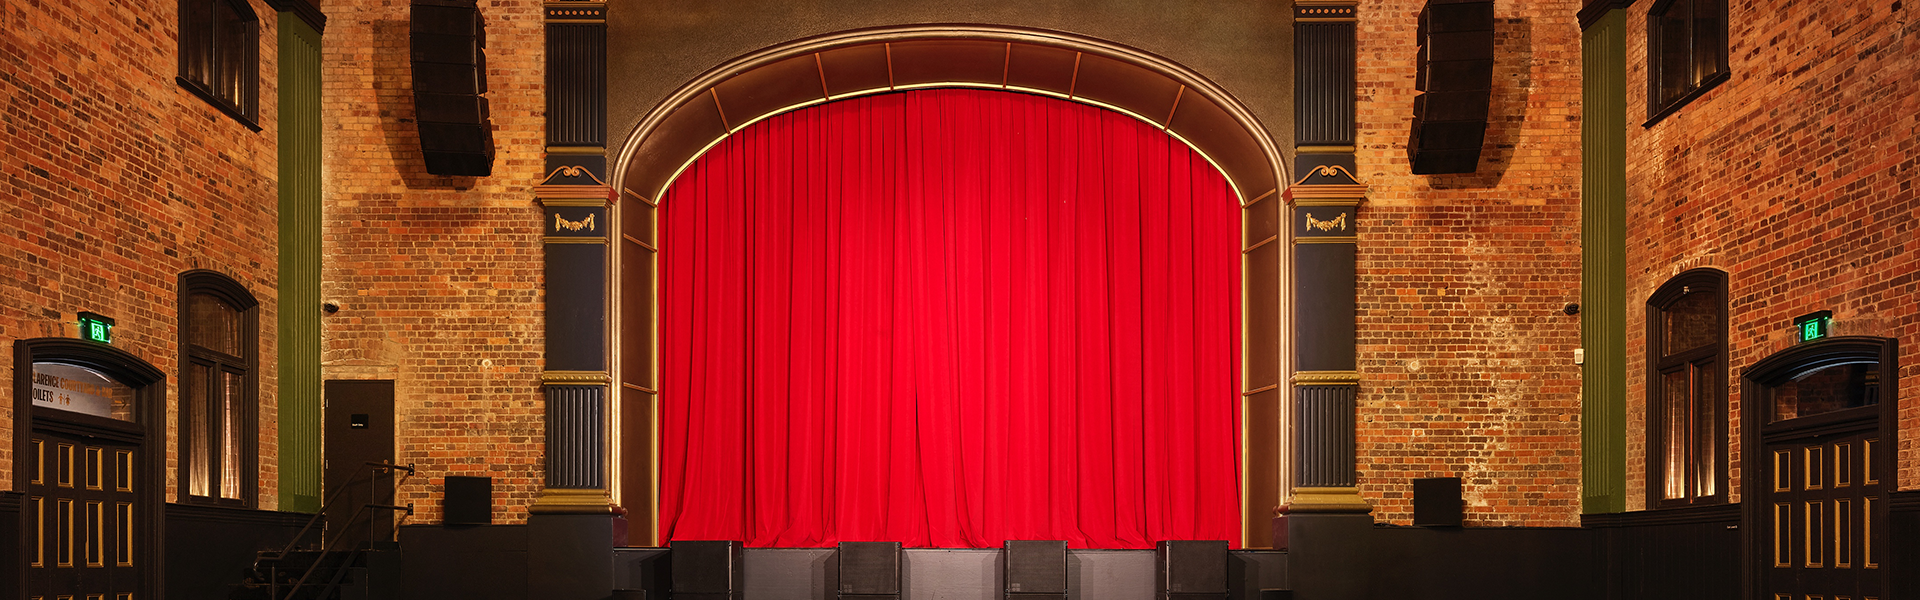 Image of an empty theatre with red stage curtain